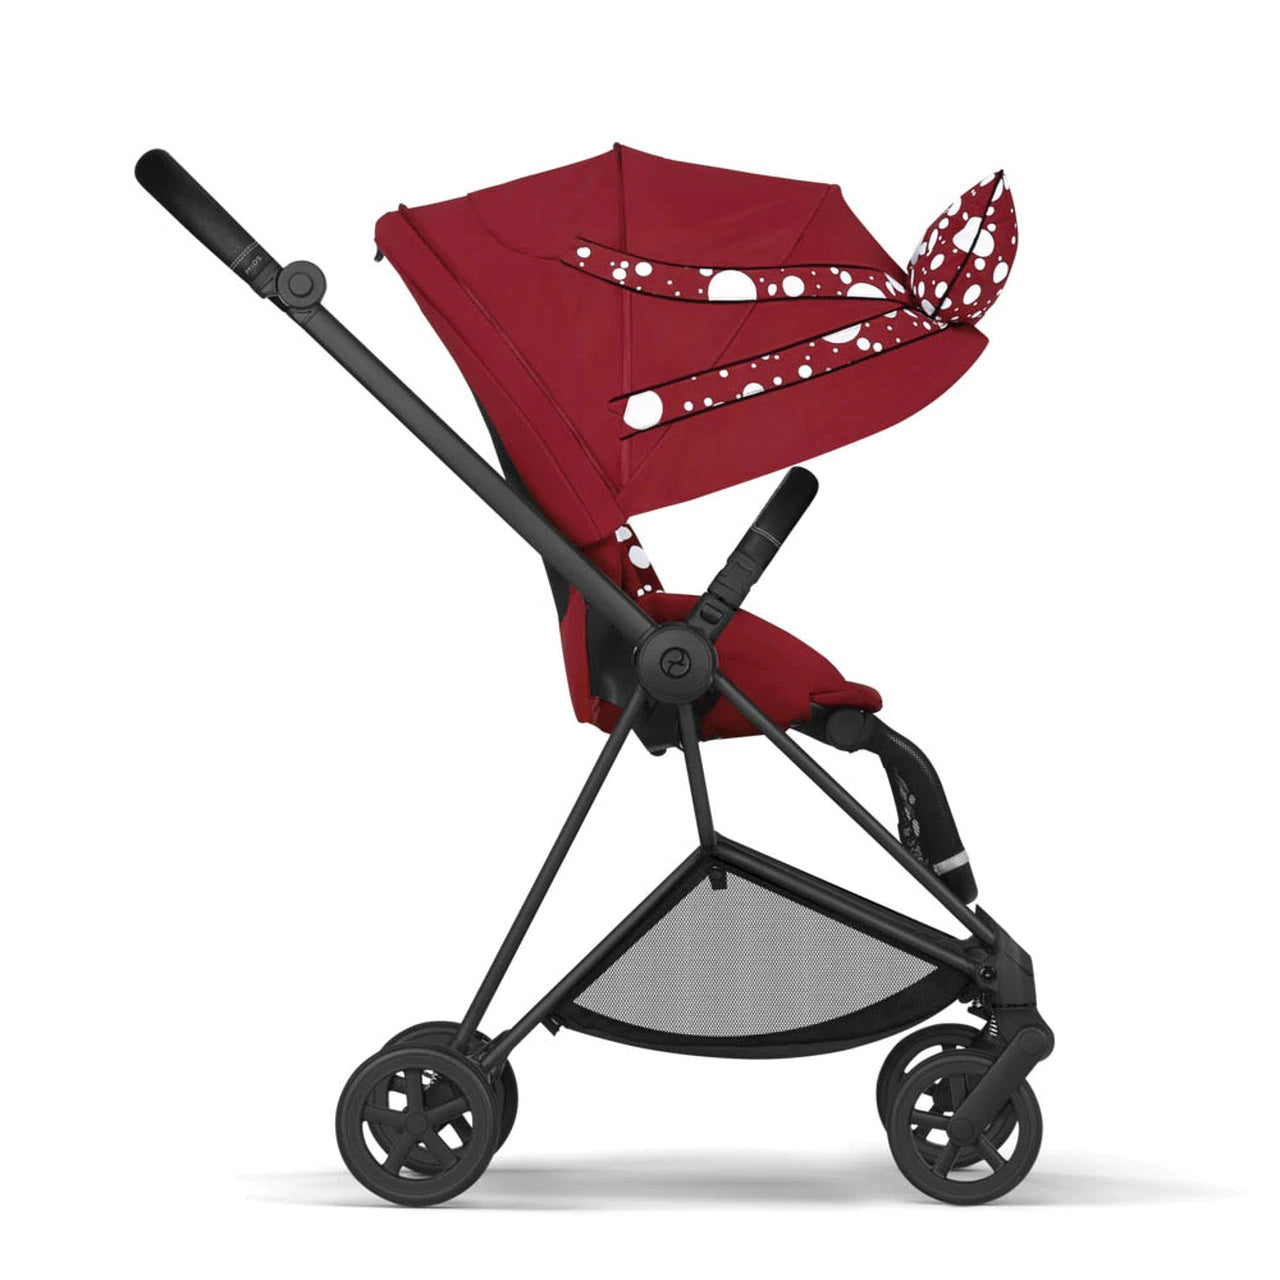 Cybex Mios Travel System with Lux Carrycot - Petticoat